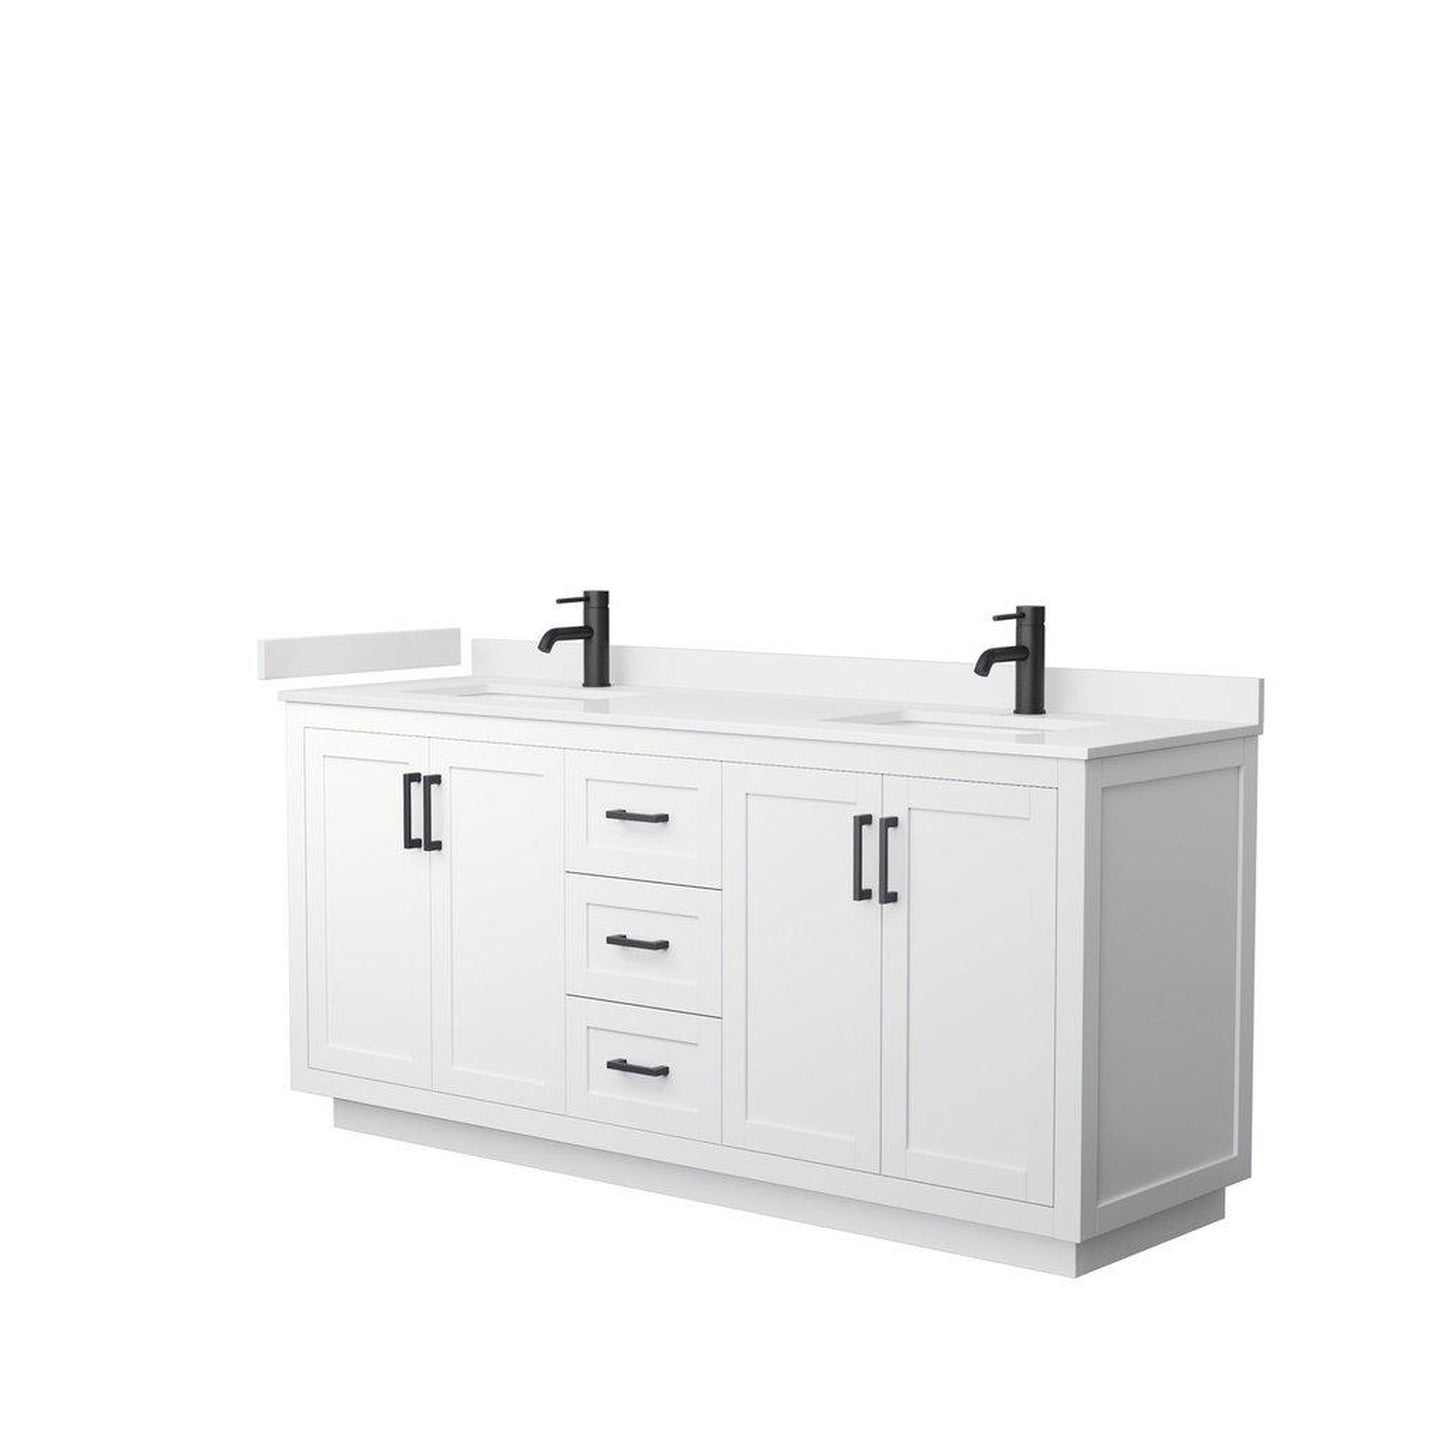 Wyndham Collection Miranda 72" Double Bathroom White Vanity Set With White Cultured Marble Countertop, Undermount Square Sink, And Matte Black Trim